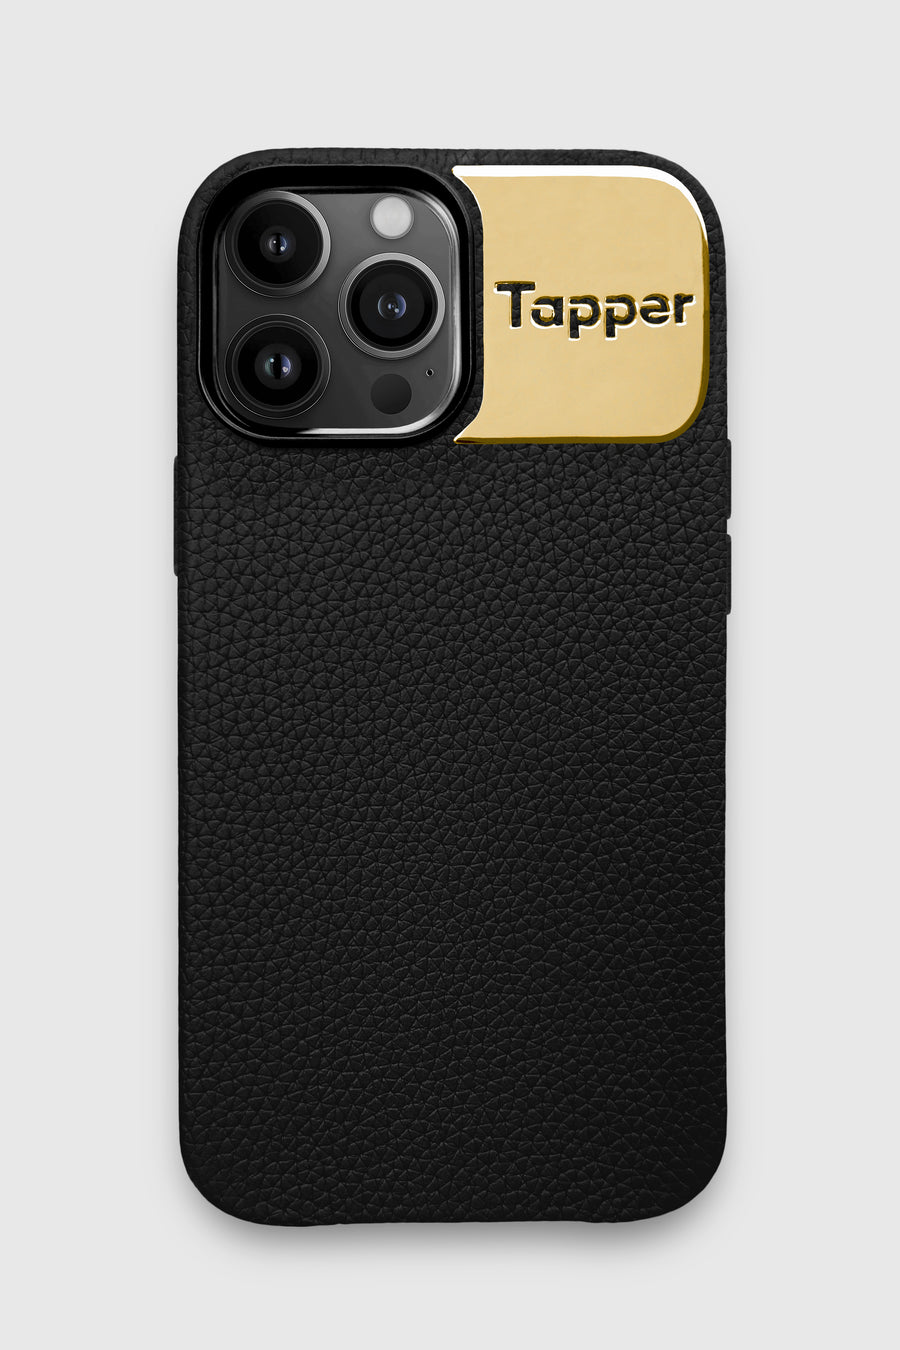 Tapper's luxurious black genuine cow leather iPhone 13 Pro Max case with MagSafe and a metal logo plate in 18k gold plating that protects and elevates the look of your iPhone 13 Pro. The next must-have high end protective Apple iPhone accessory in real leather and precious metals. Designed in Sweden by Tapper. Free Express Shipping at gettapper.com